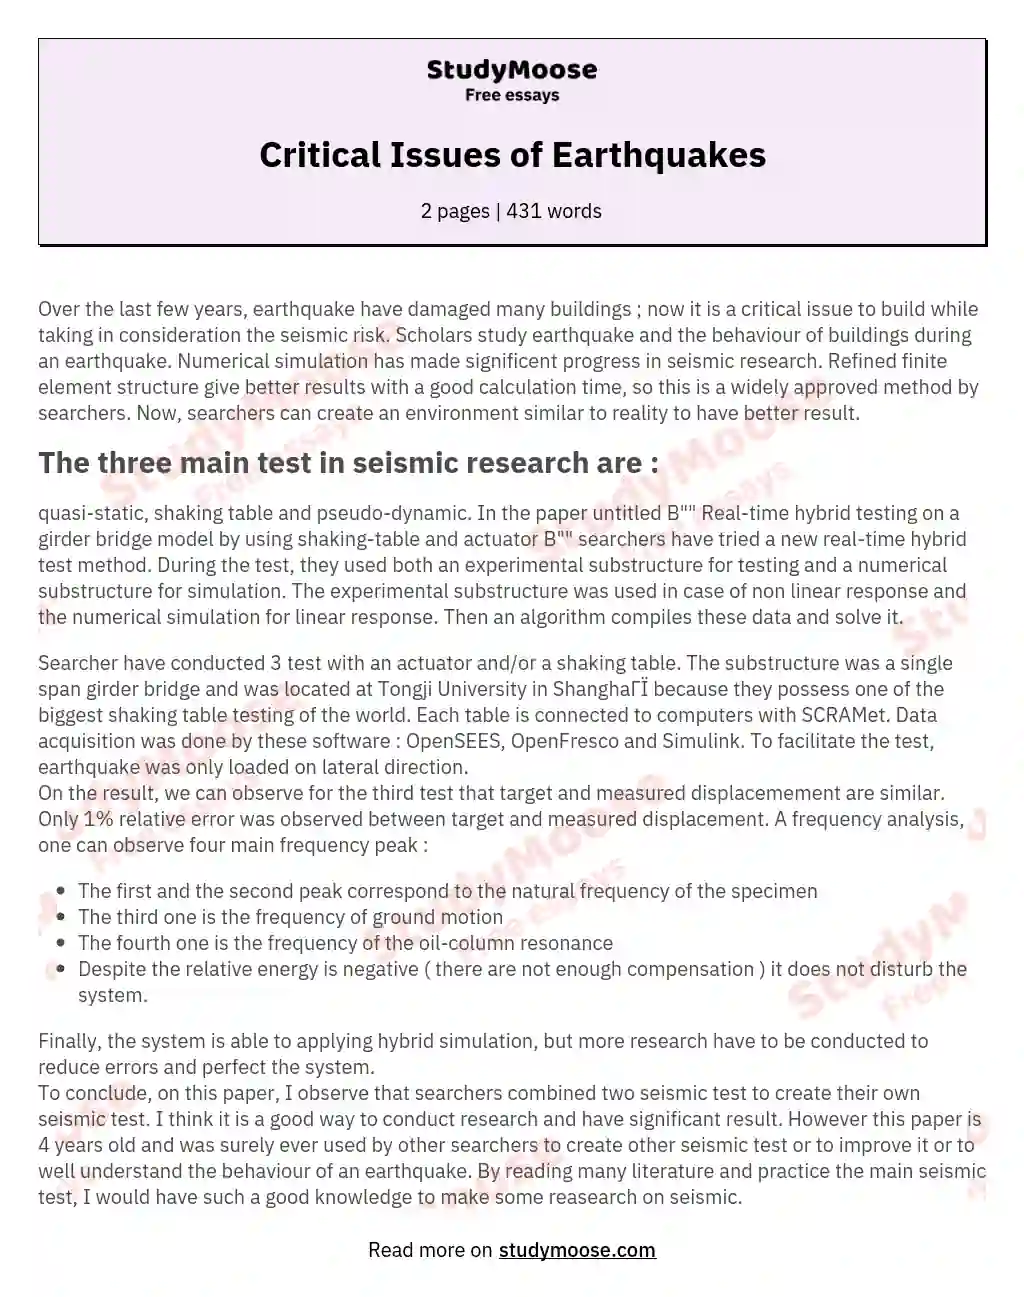 Critical Issues of Earthquakes